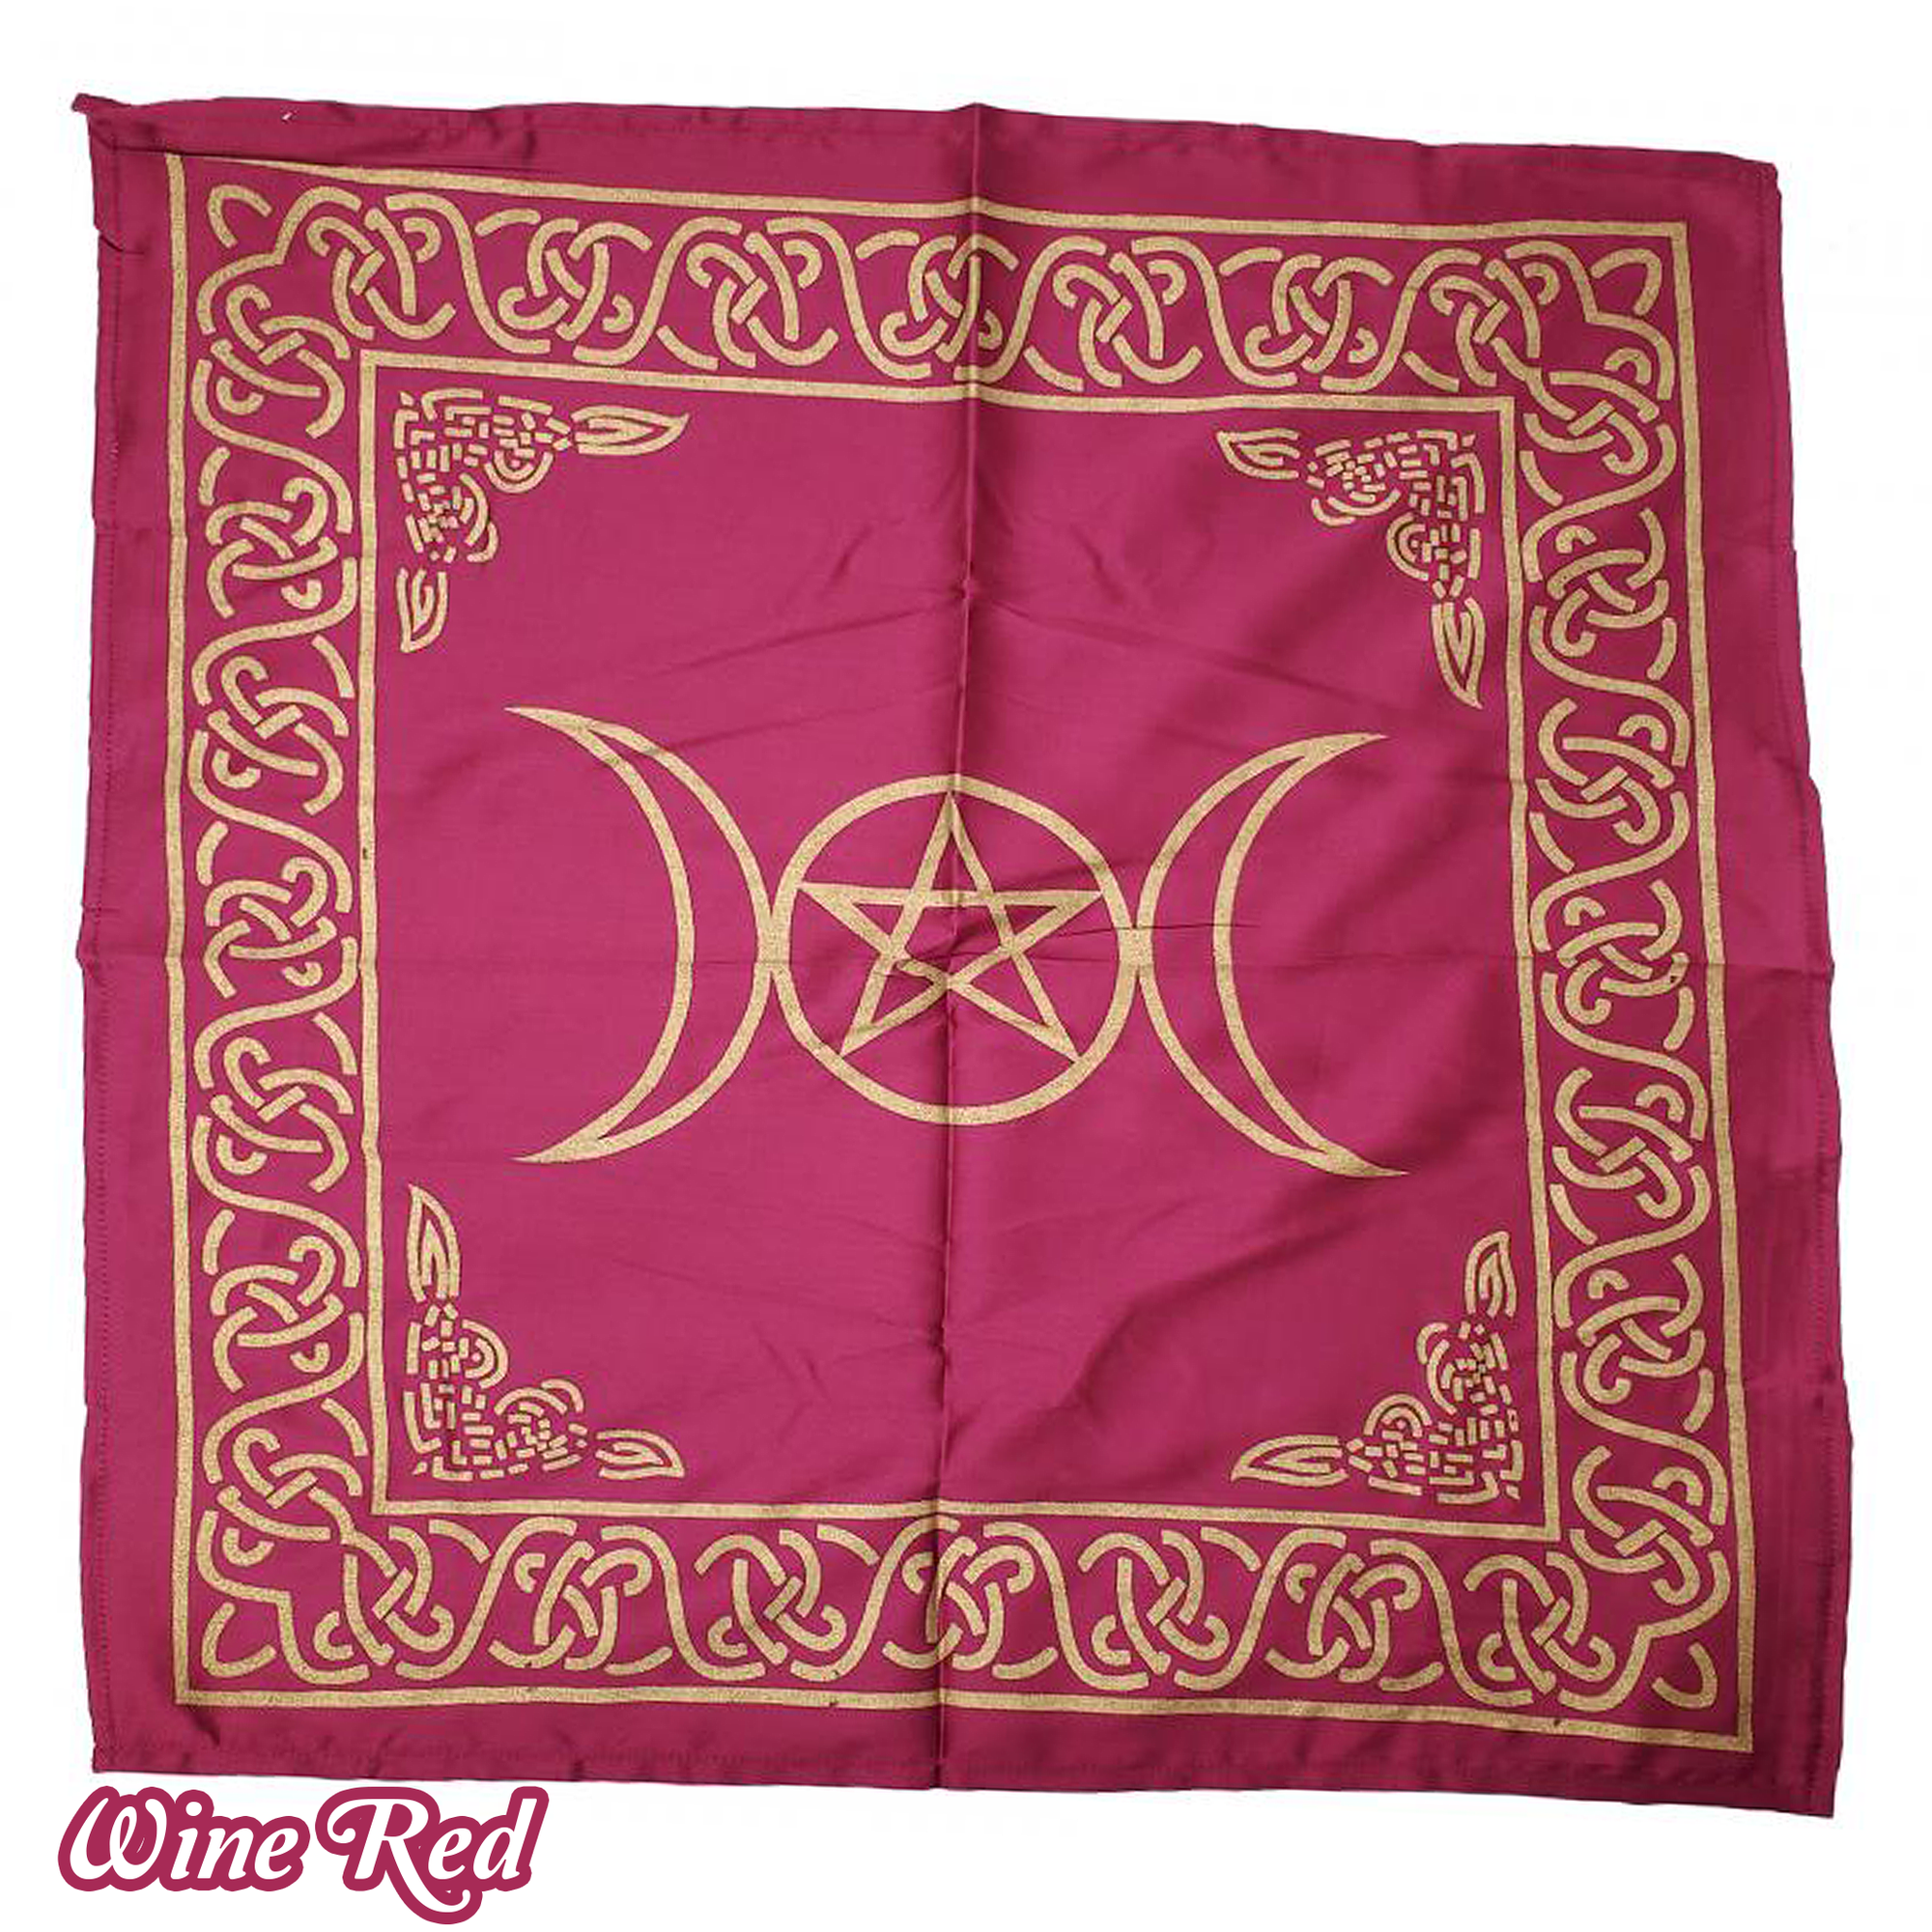 Small Altar Table Cloth - Choose Your Color! - Wine Red